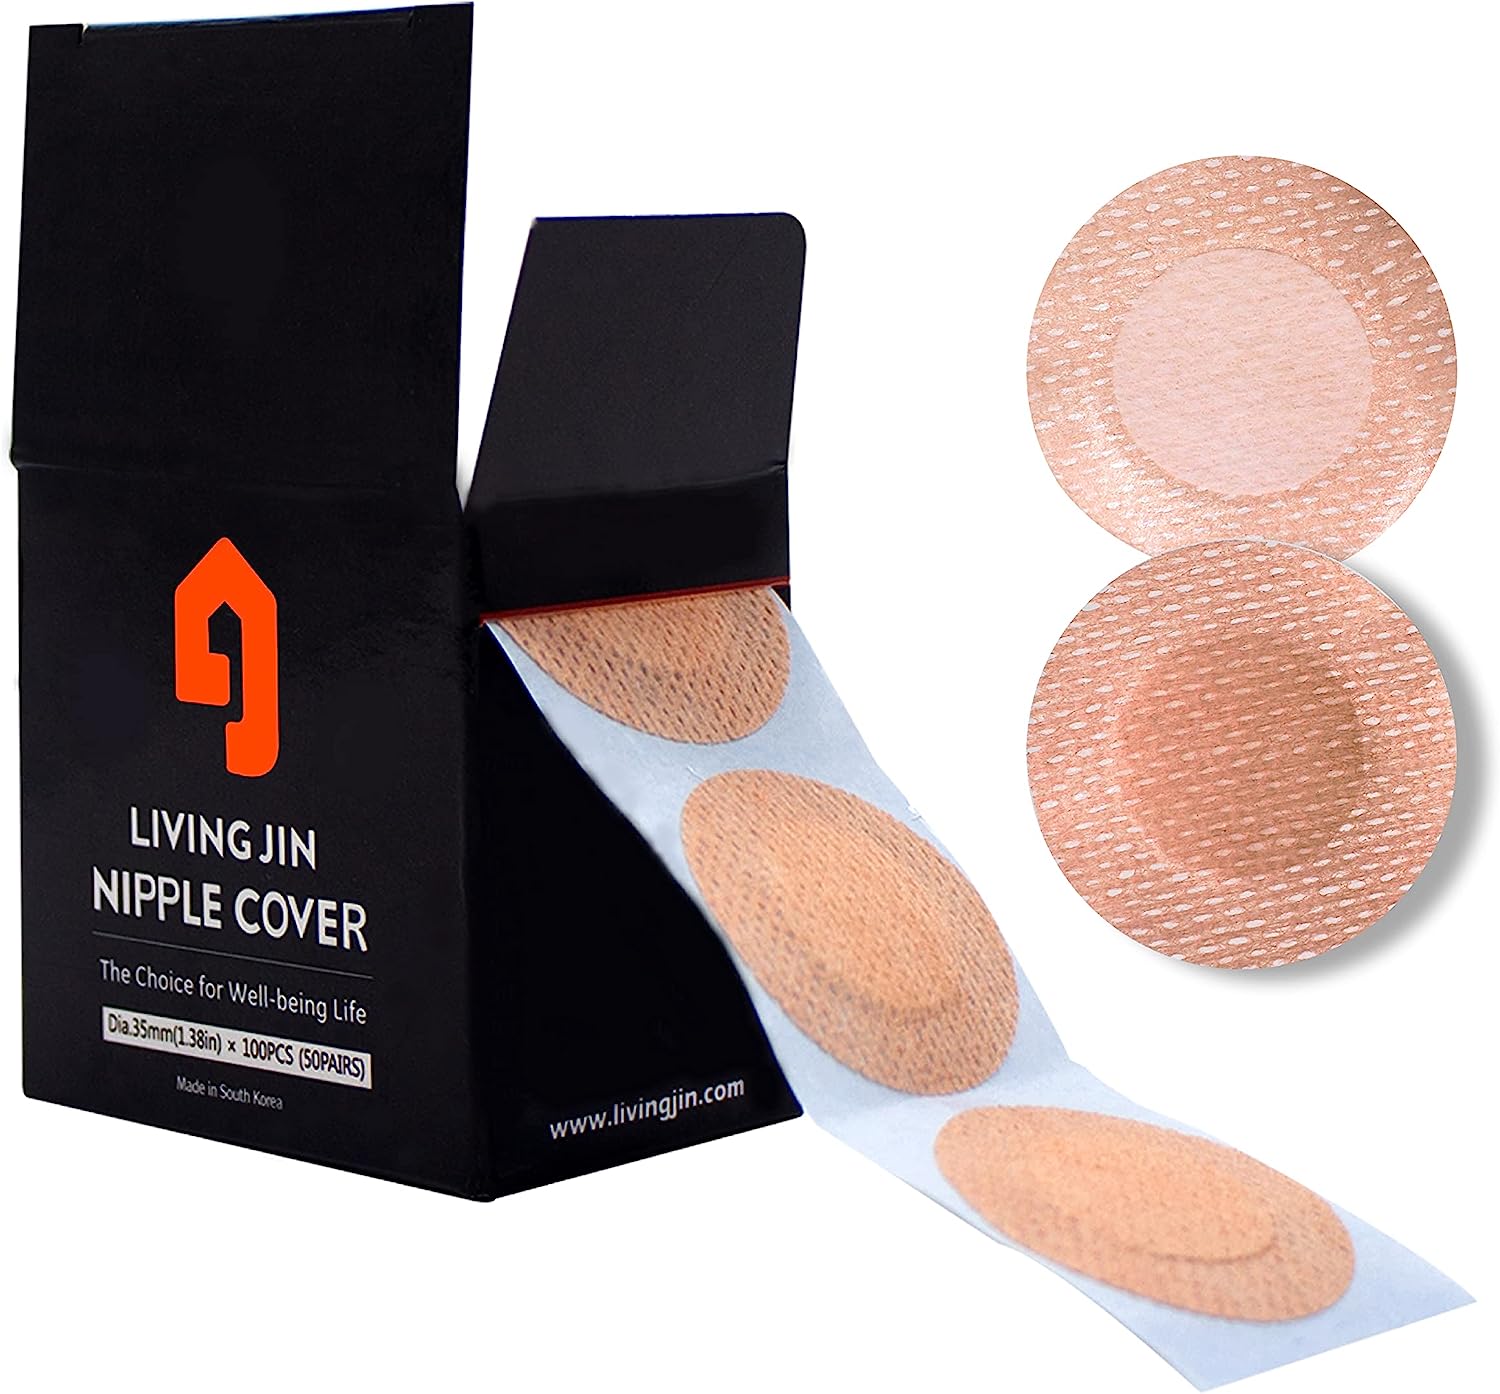 LIVING JIN Nipple Protector - Value Pack (50 Pairs), [...]